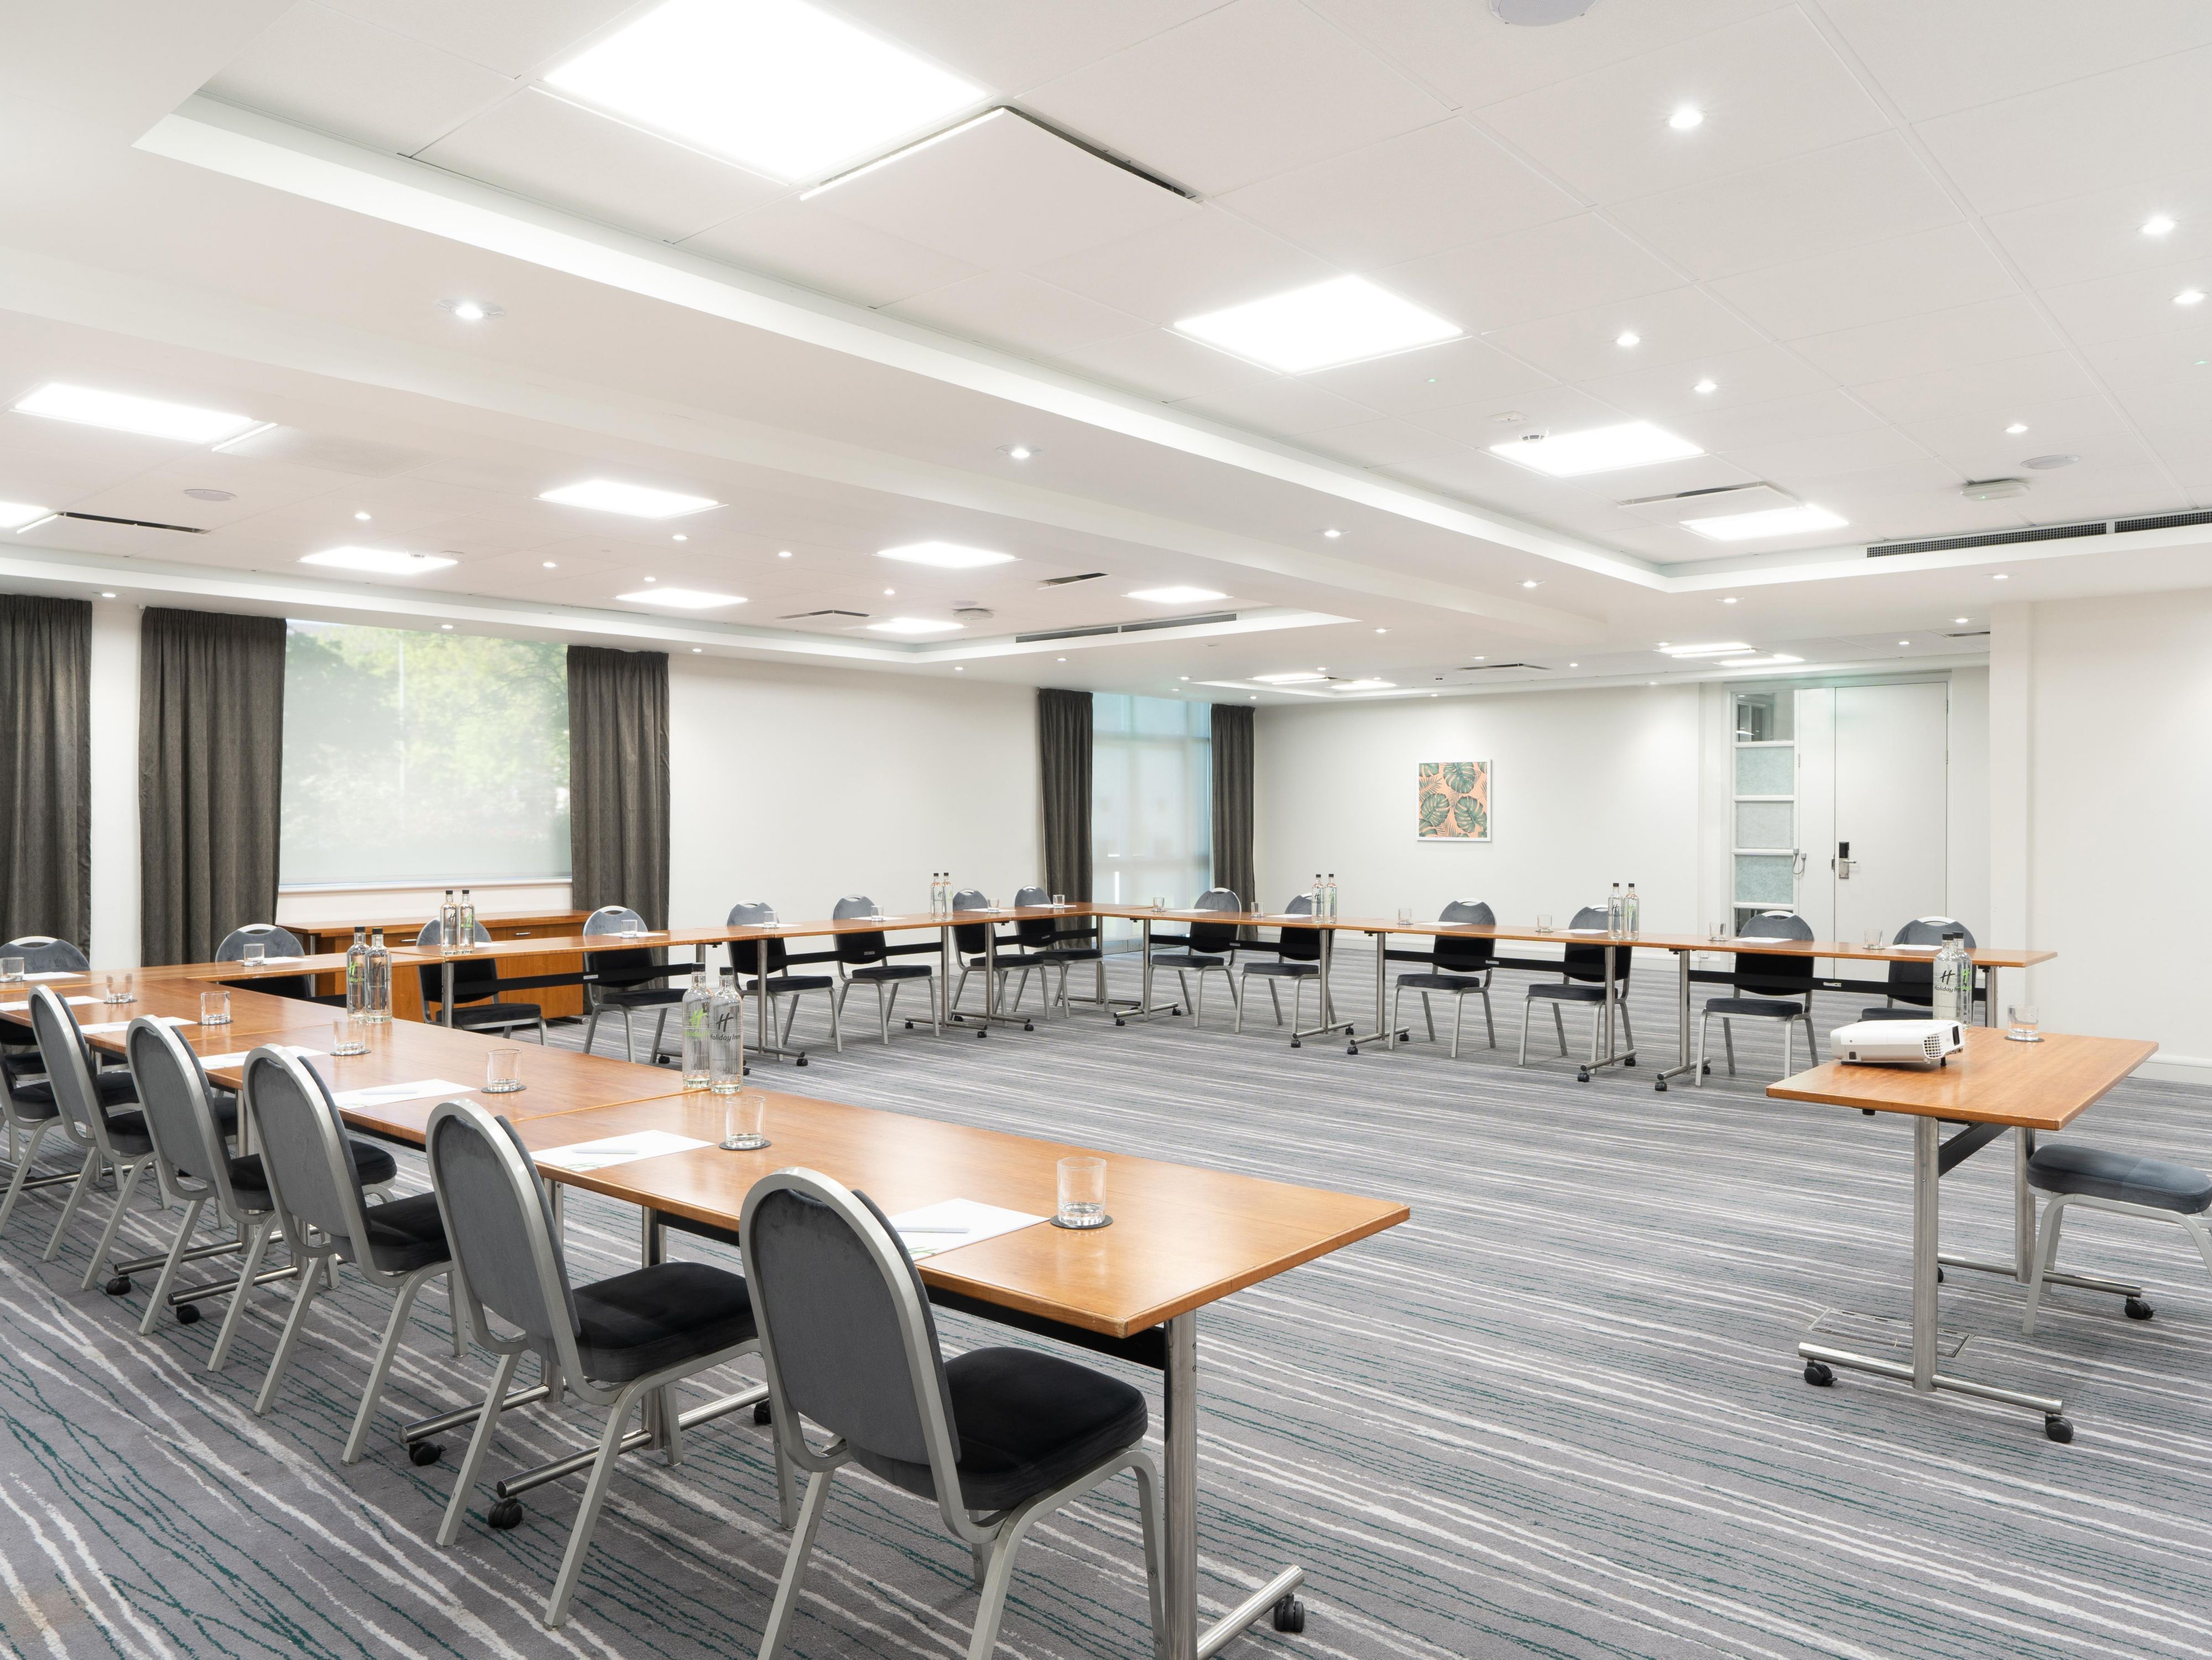 If you’re planning a big event, our Academy has 10 flexible function rooms catering for both leisure and business events with style, comfortably seating and serving up to 150 guests in our largest Suite. We also boast state-of-the-art 85" flat screen TVs in most rooms!